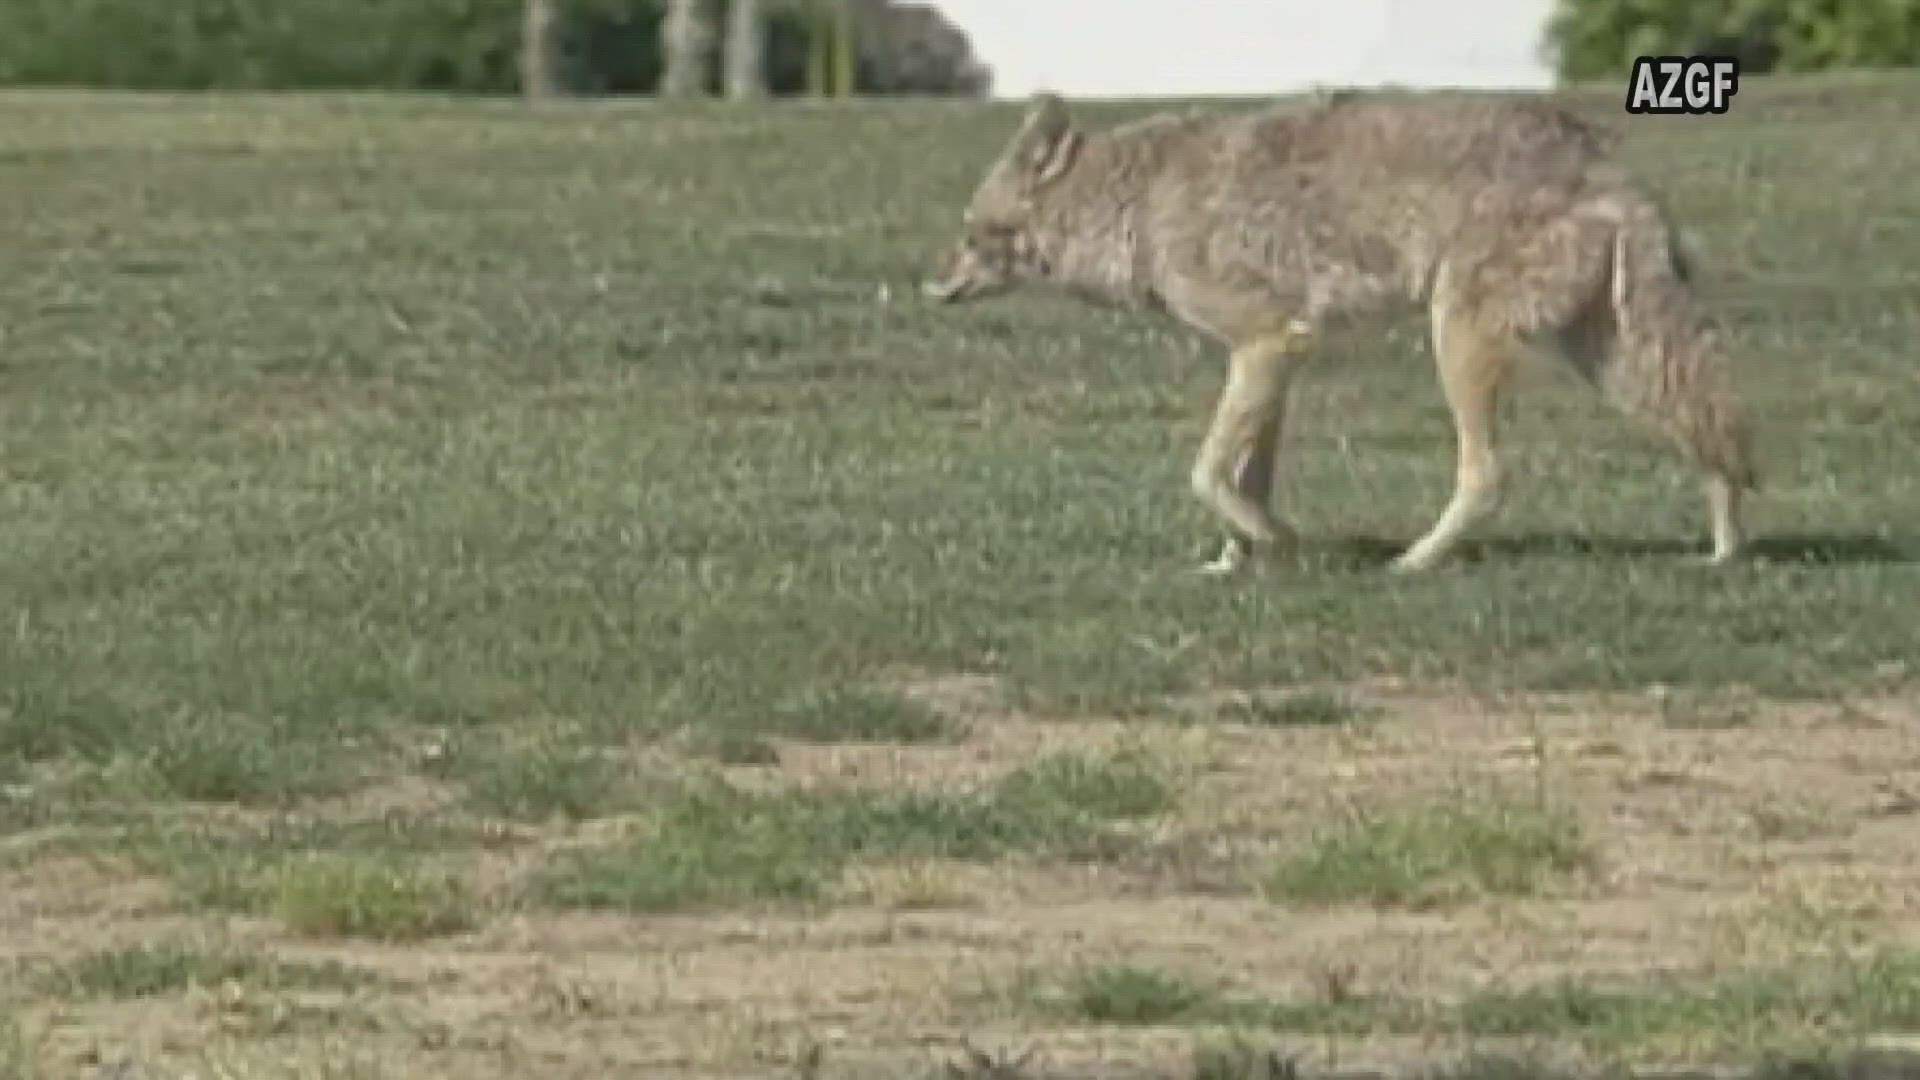 Two recent coyote attacks have left police searching for a coyote on the run.